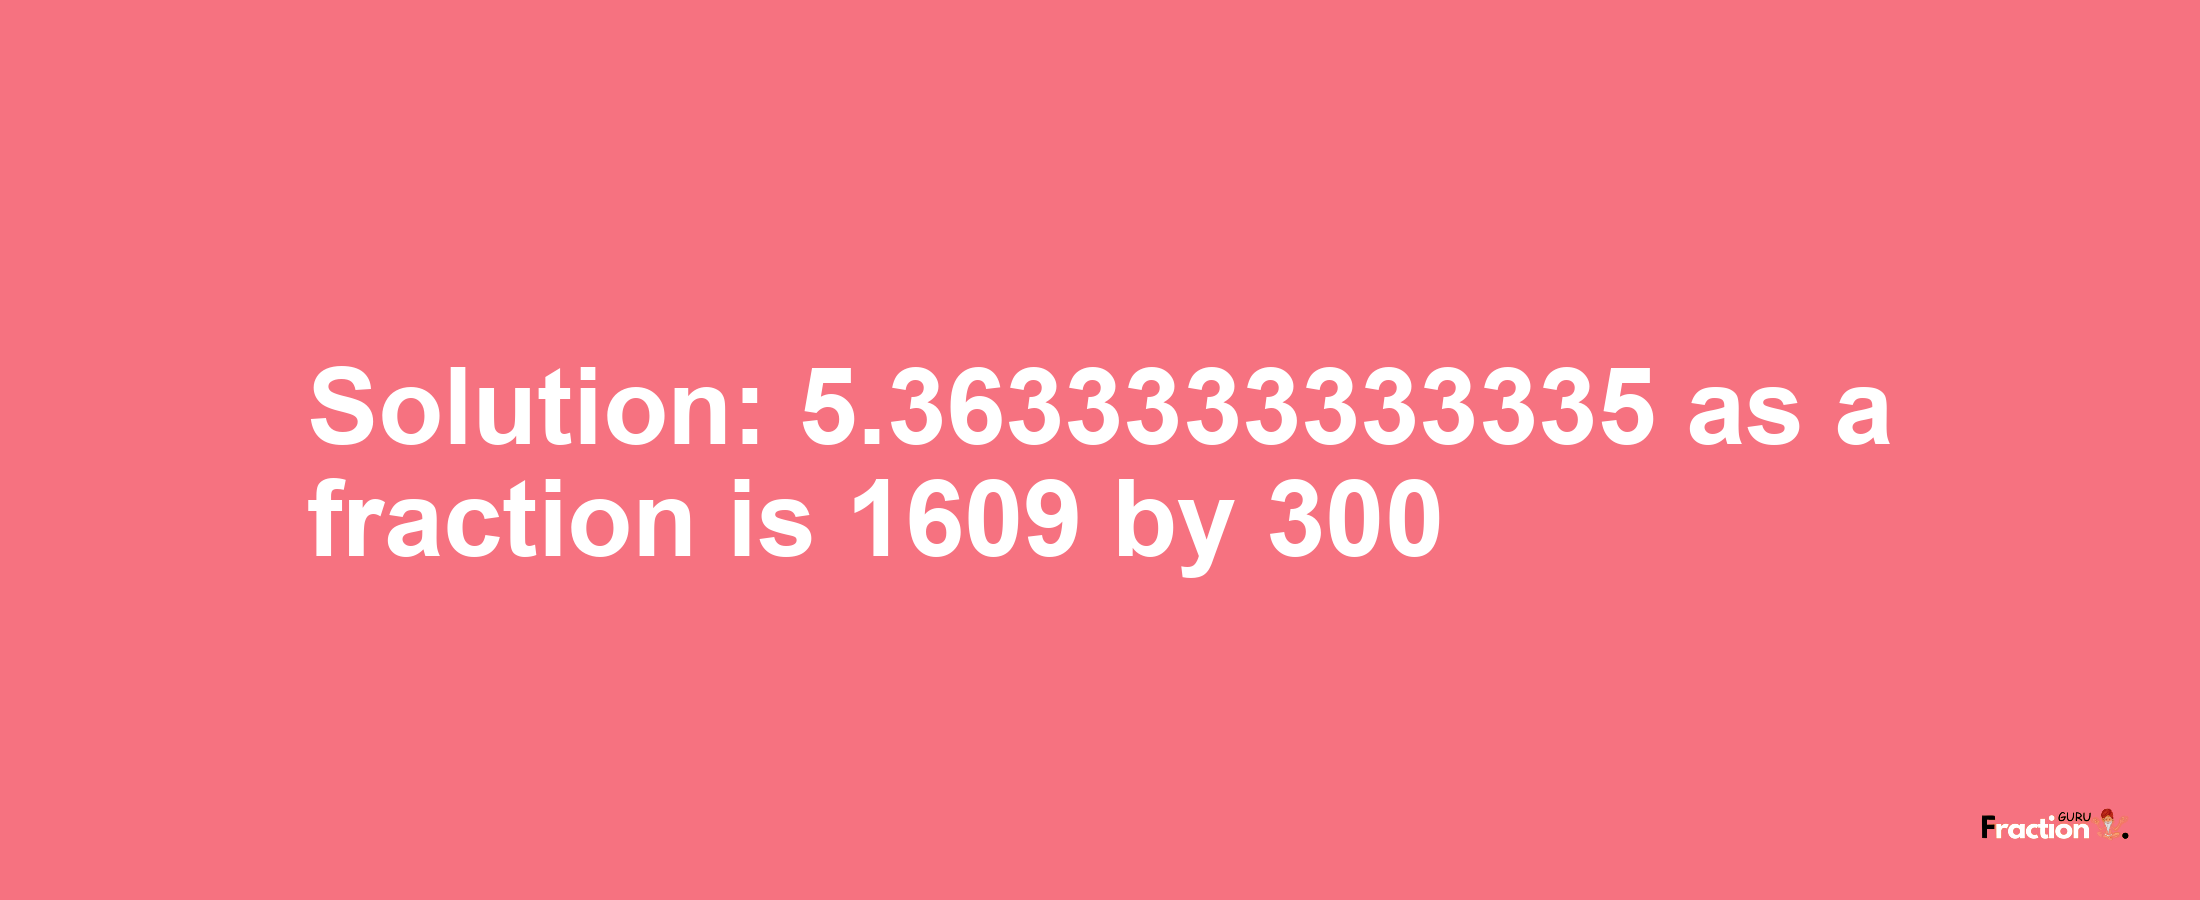 Solution:5.3633333333335 as a fraction is 1609/300